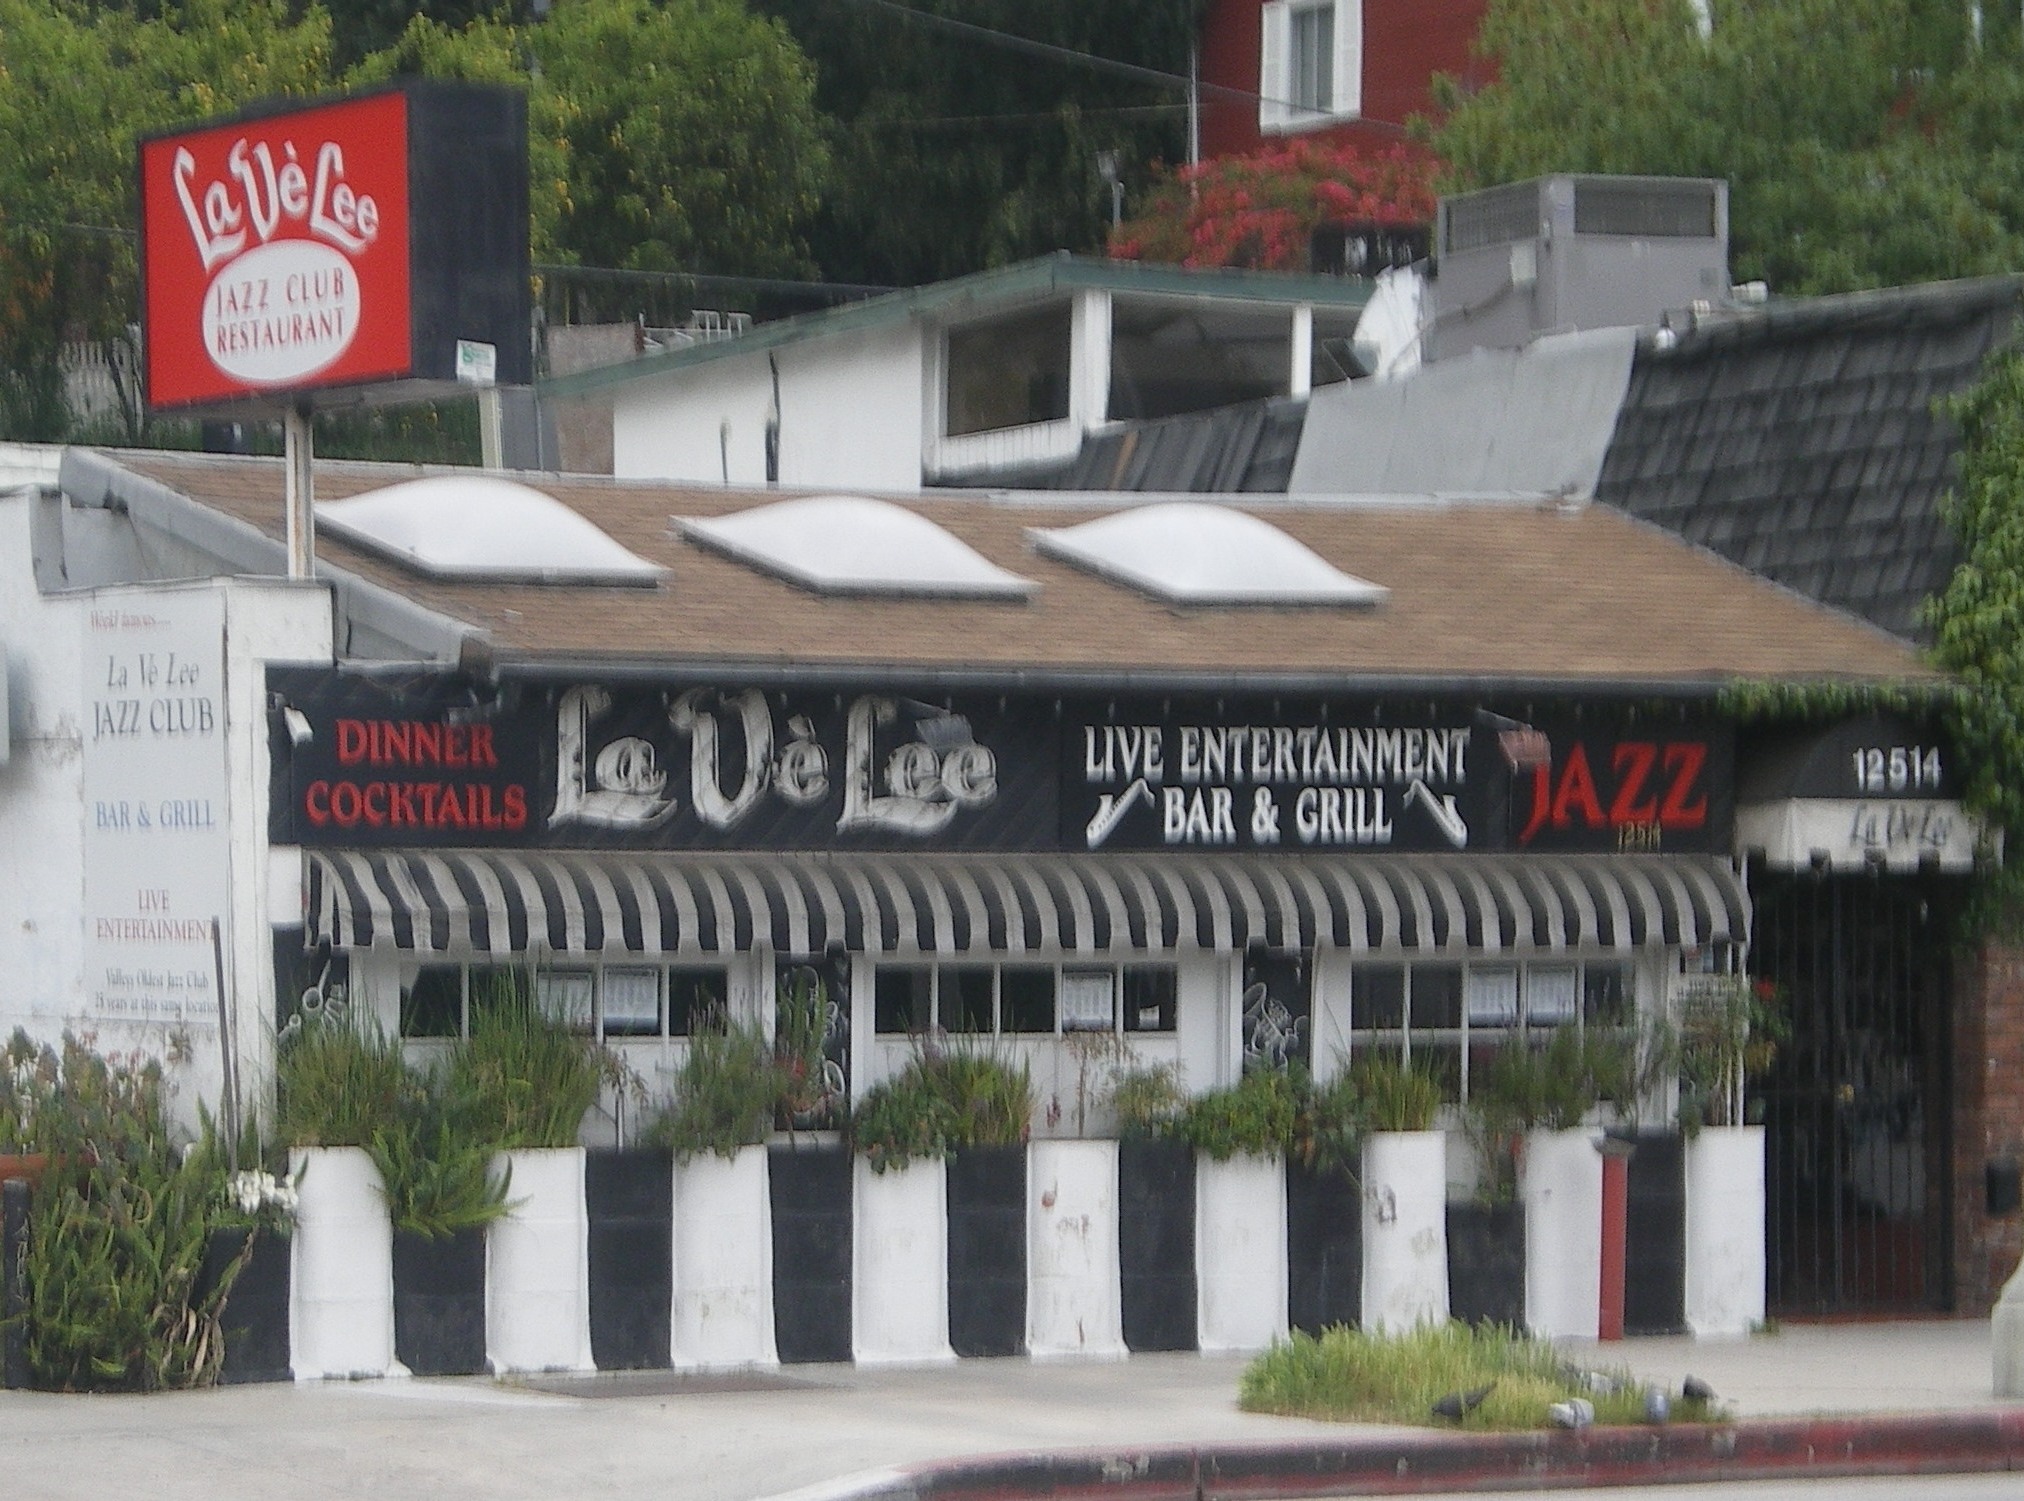 HAVE YOU EVER HEARD OF LA VE LEE? A LITTLE HISTORY OF BRAZILIAN MUSIC IN LOS ANGELES